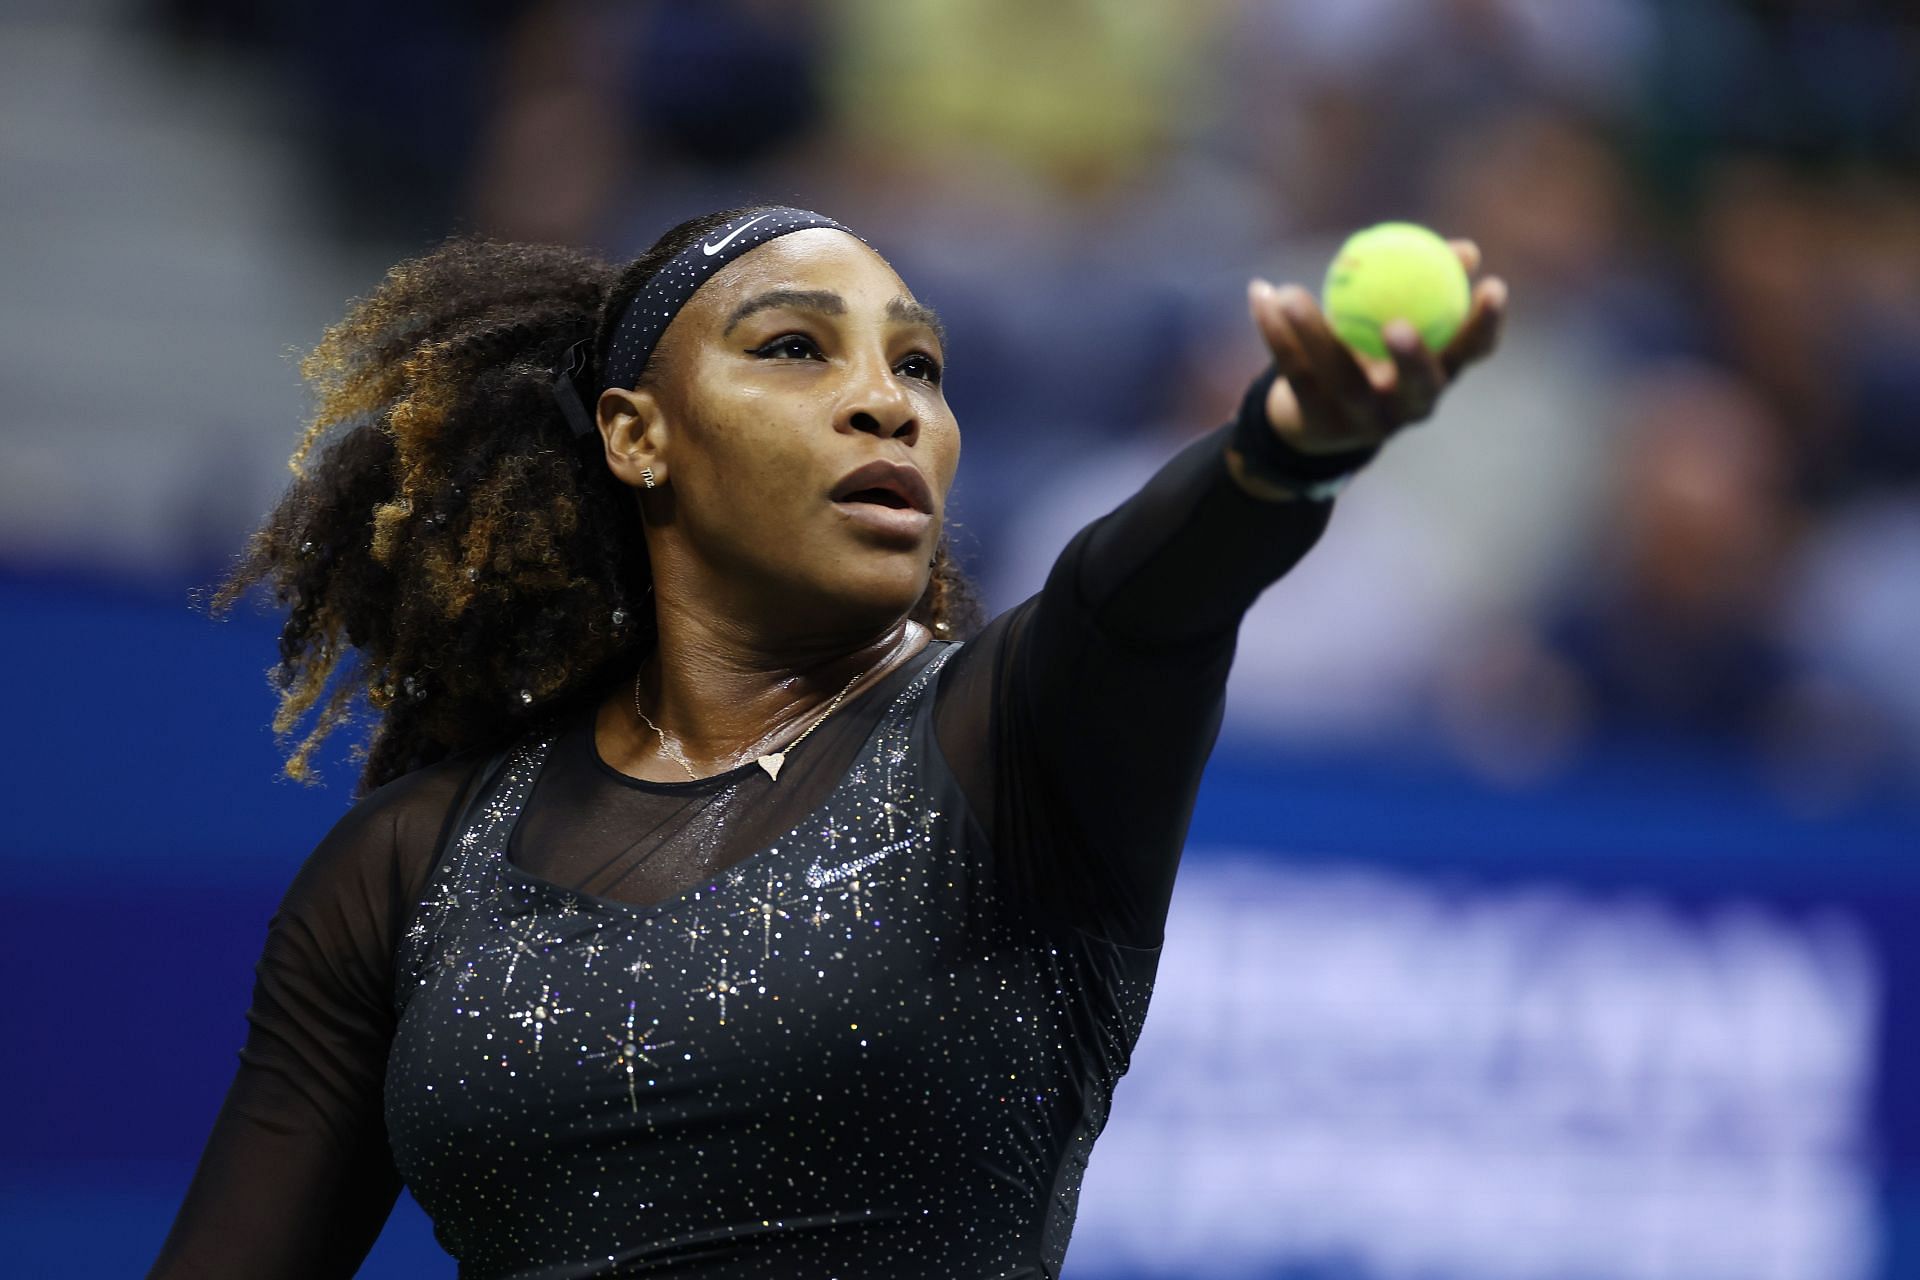 Serena Williams of the United States serves against Ajla Tomlijanovic of Australia at the 2022 US Open - Day 5